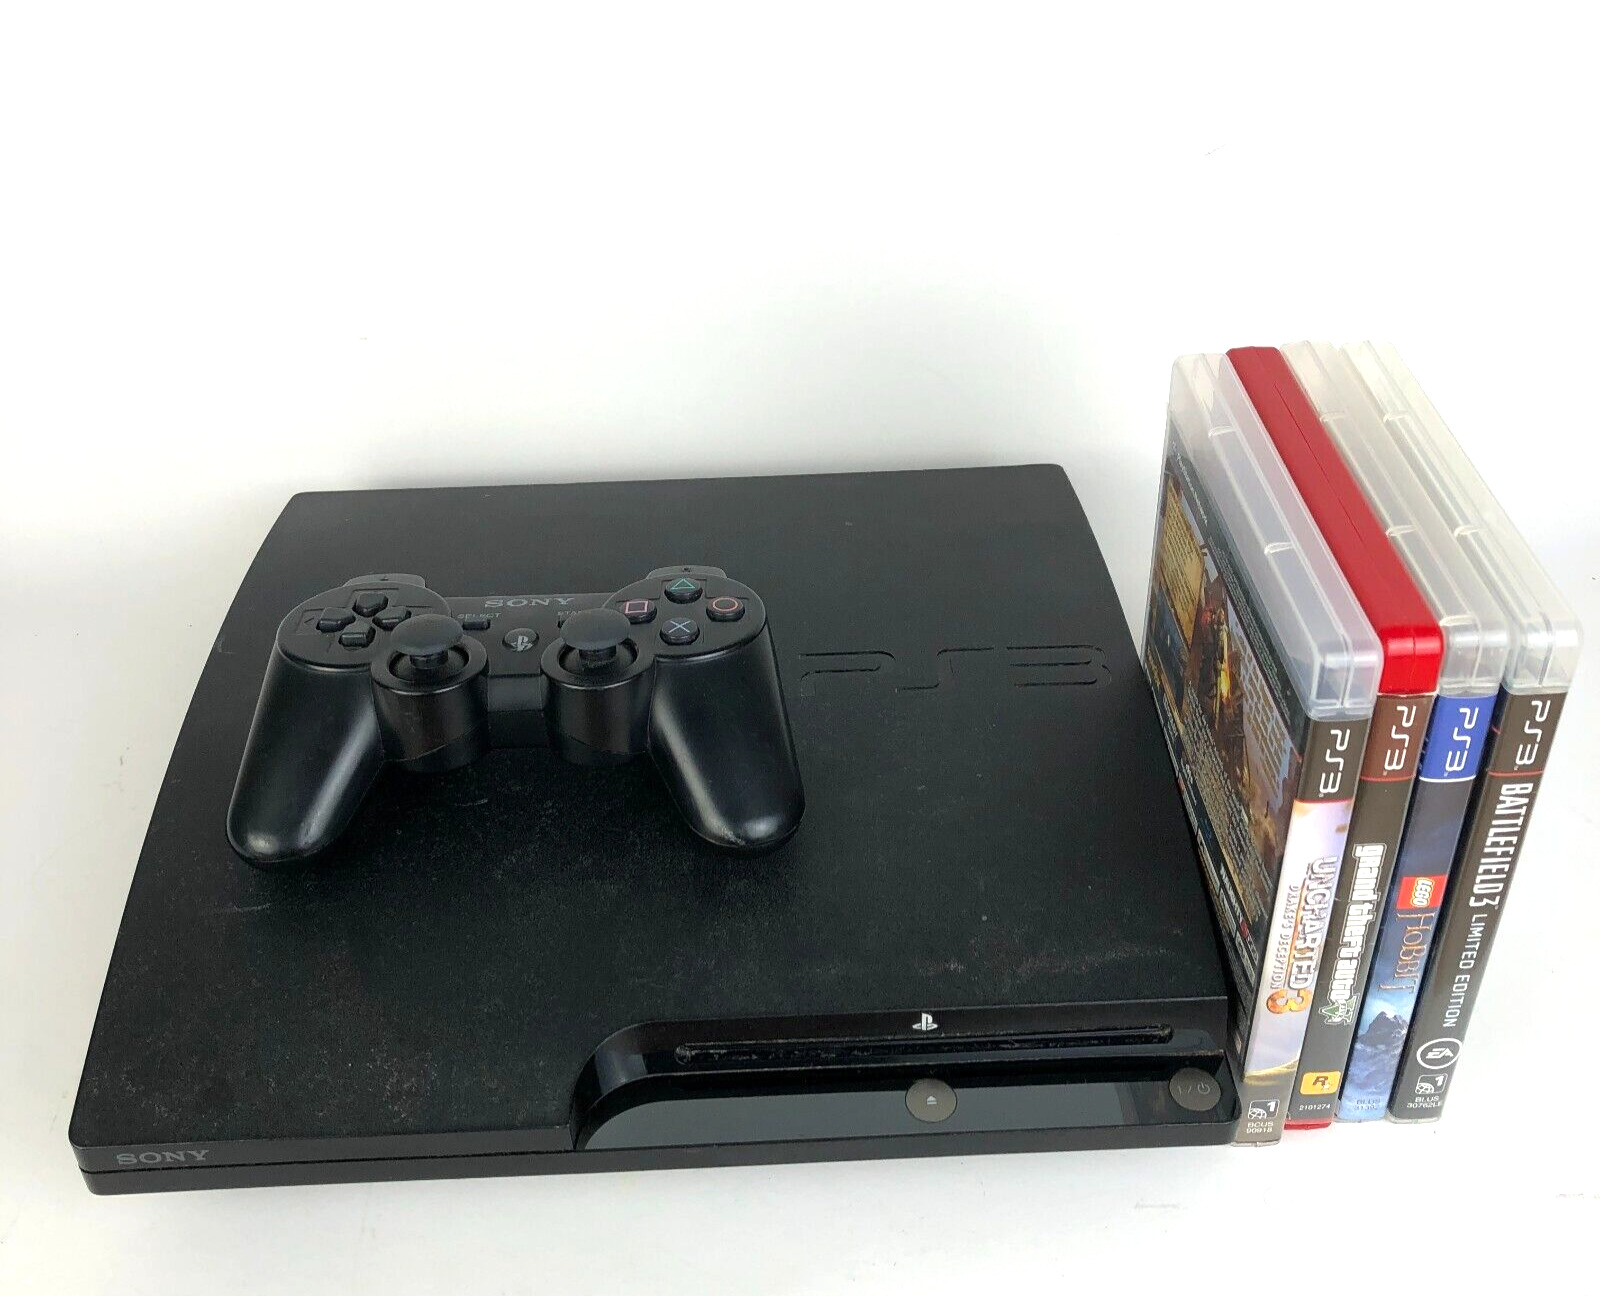 Sony PlayStation 3 PS3 Slim 160GB CECH-2501A Console with Authentic Controller